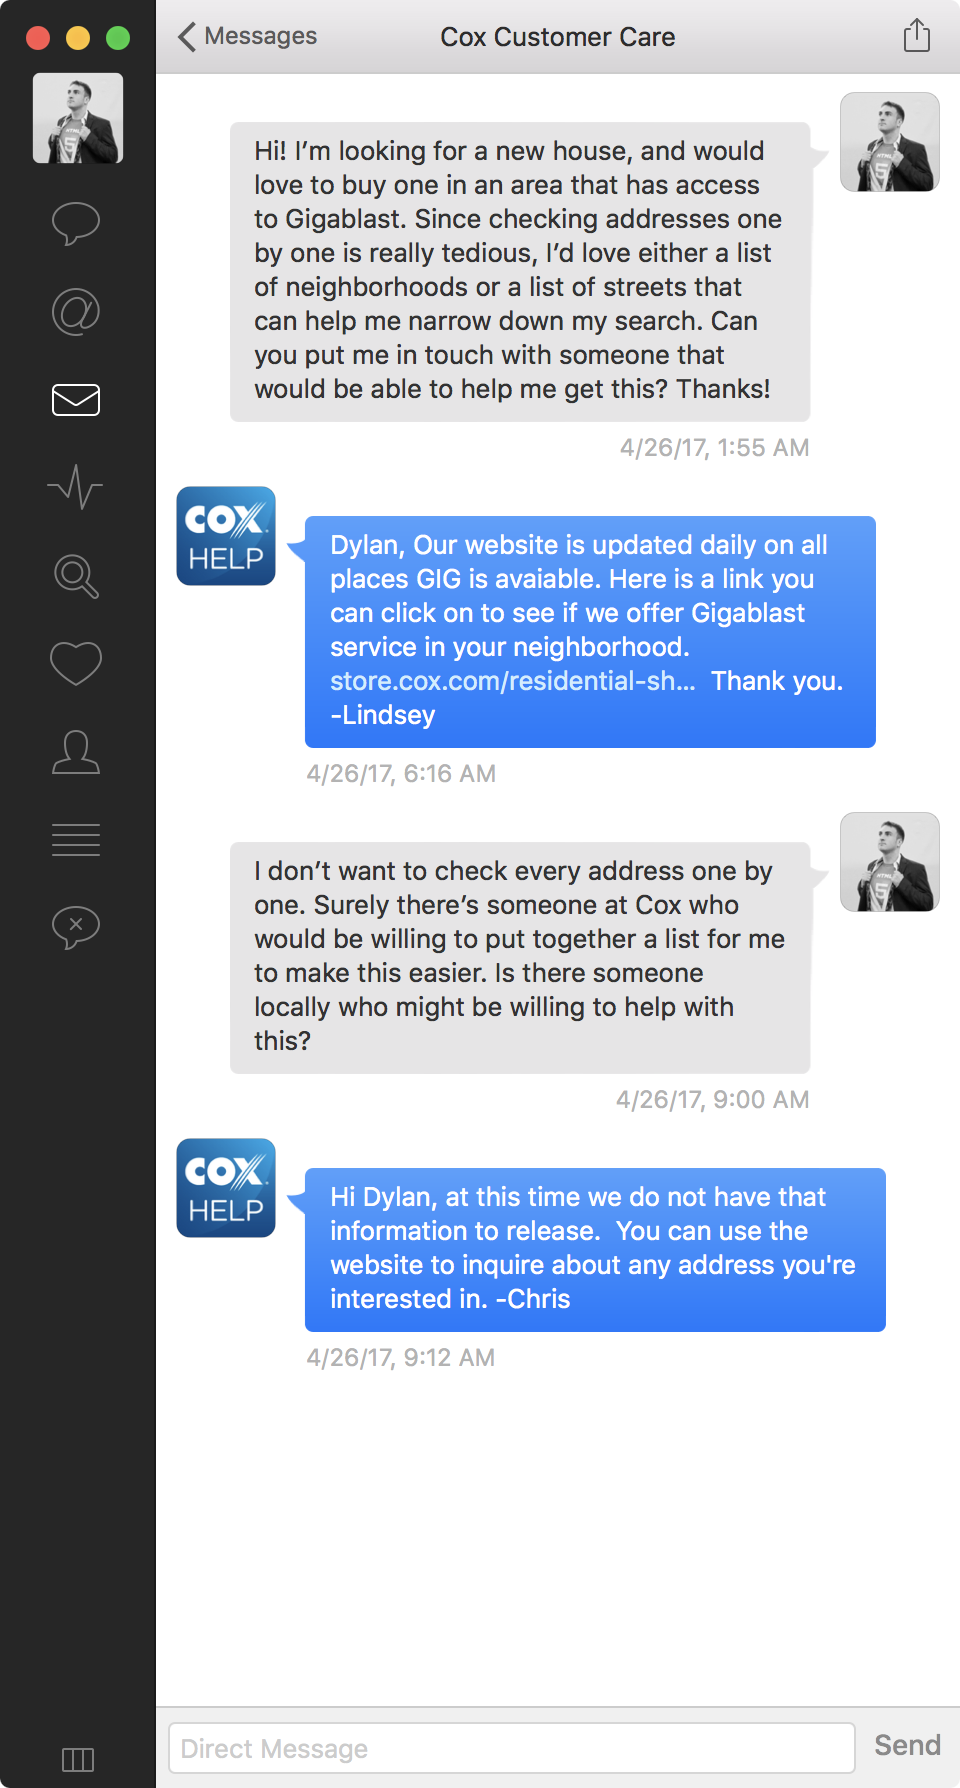 Cox's entirely unhelpful response when asked for a list of addresses that have gigabit internet.